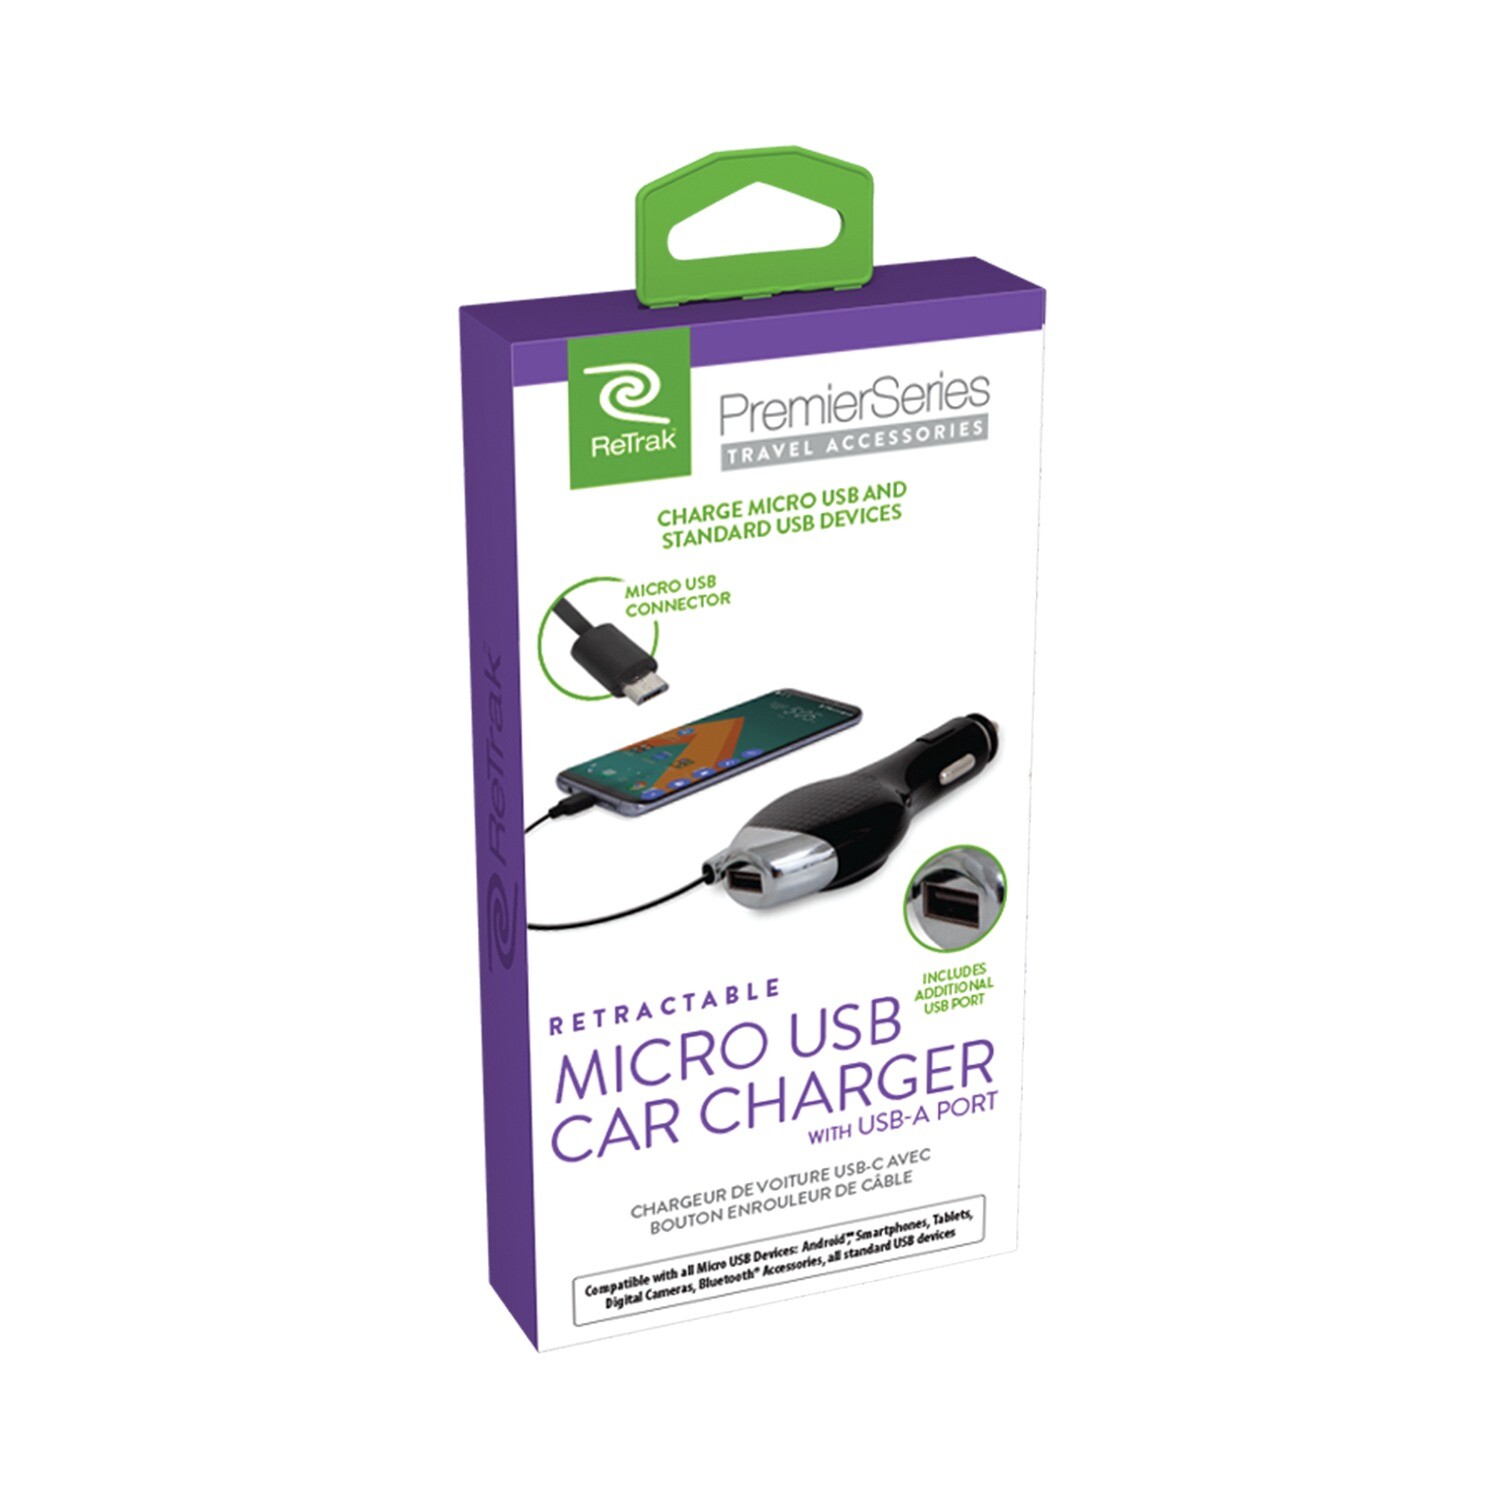 CHARGEUR ALLUME CIGARE USB AVEC CABLE USB/MICROUSB